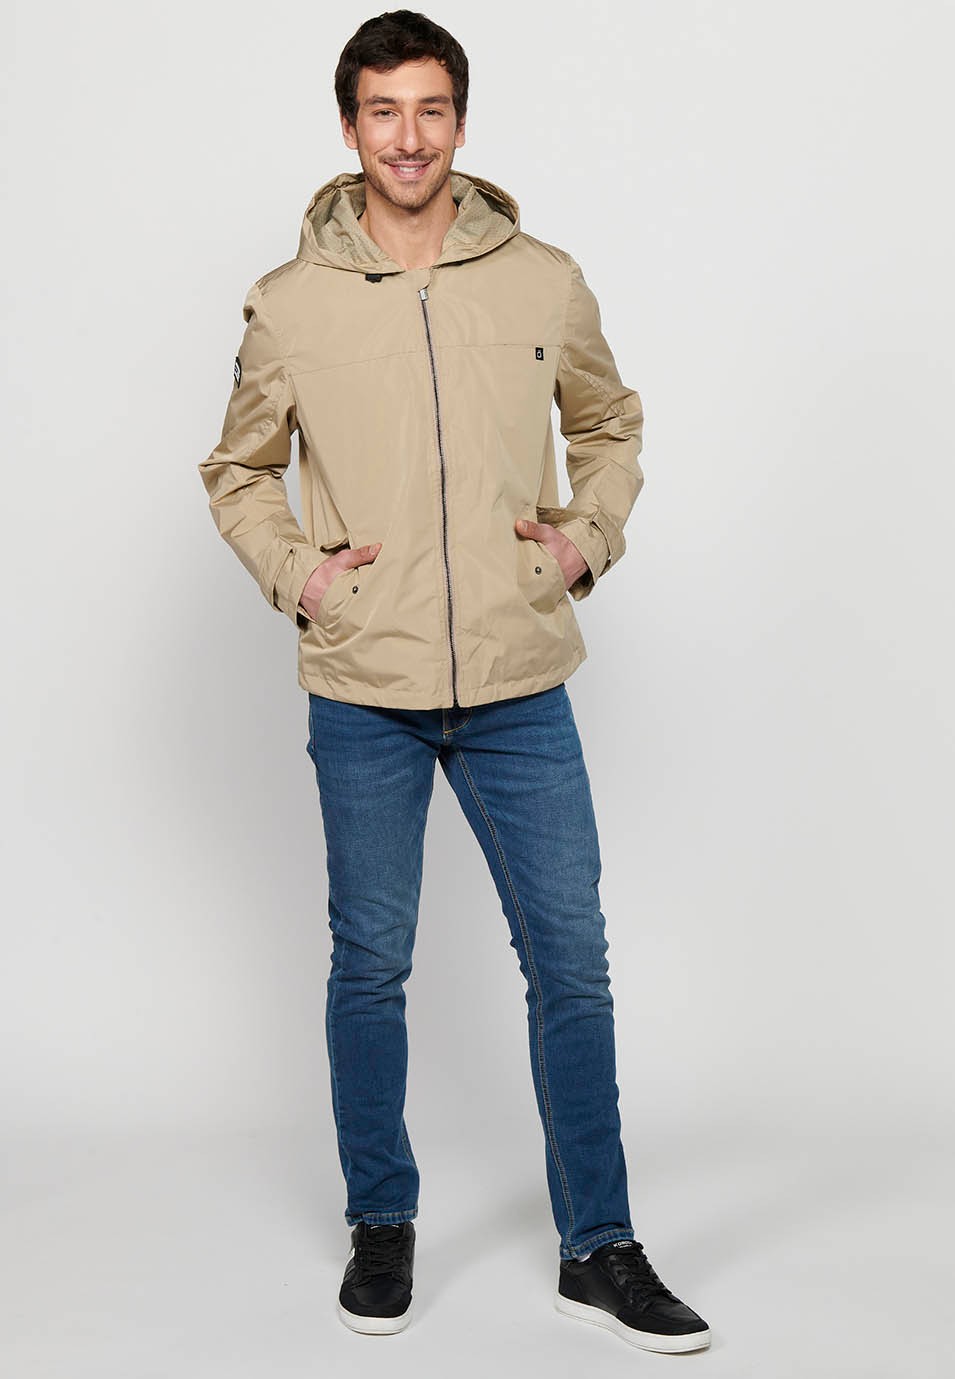 Water Repellent Jacket with Hooded Collar and Front Zipper Closure, Beige Pockets for Men 3